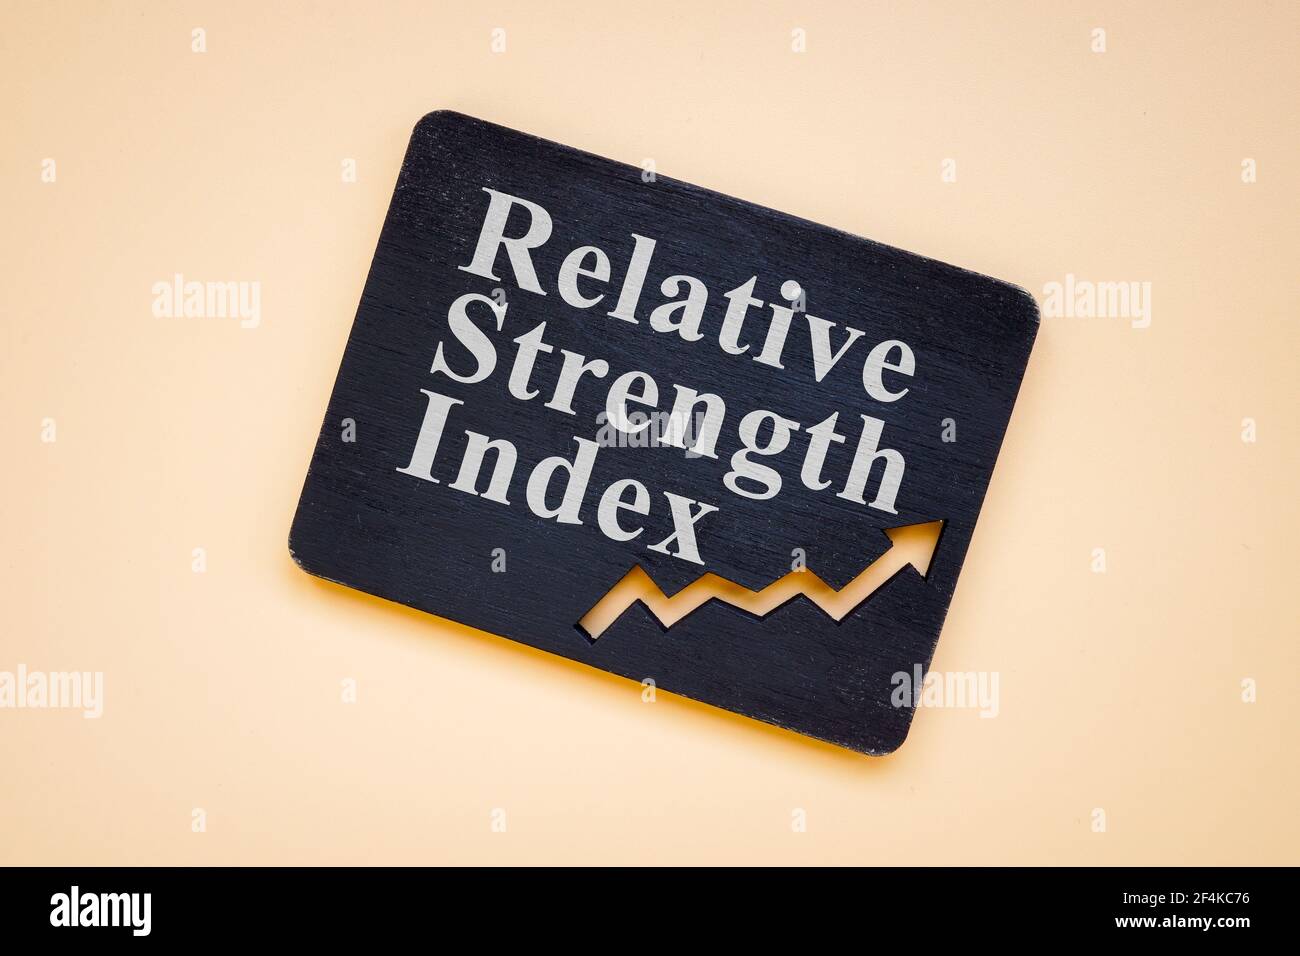 RSI Relative Strength Index words on the black plate. Stock Photo